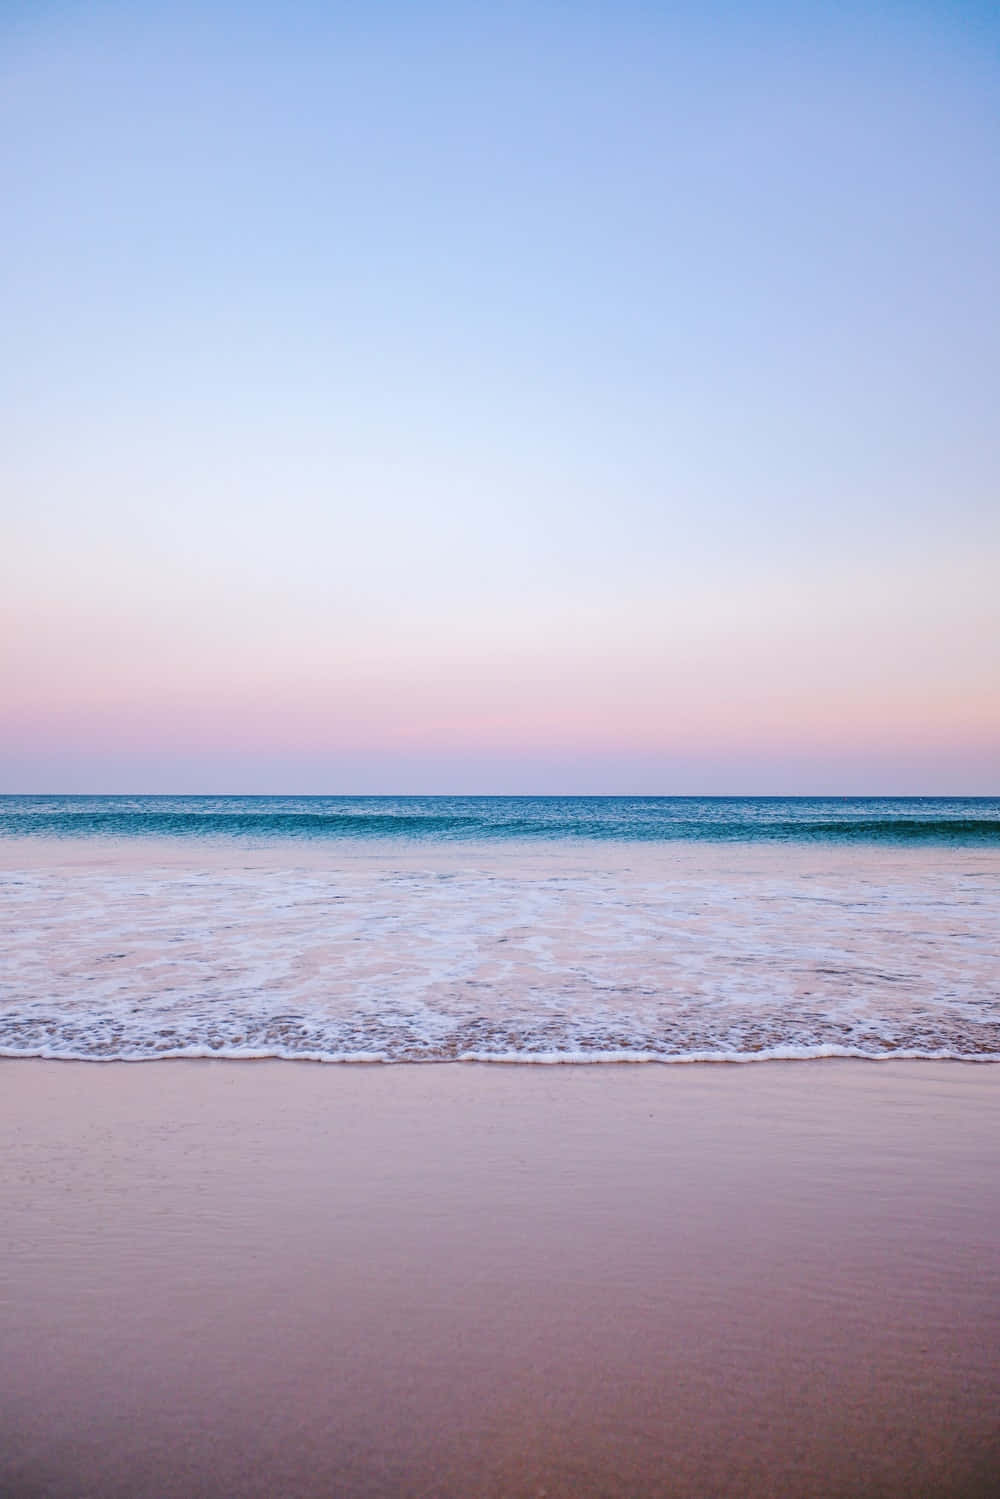 Relax on the tranquil pastel coloured beach, perfect for summer days. Wallpaper